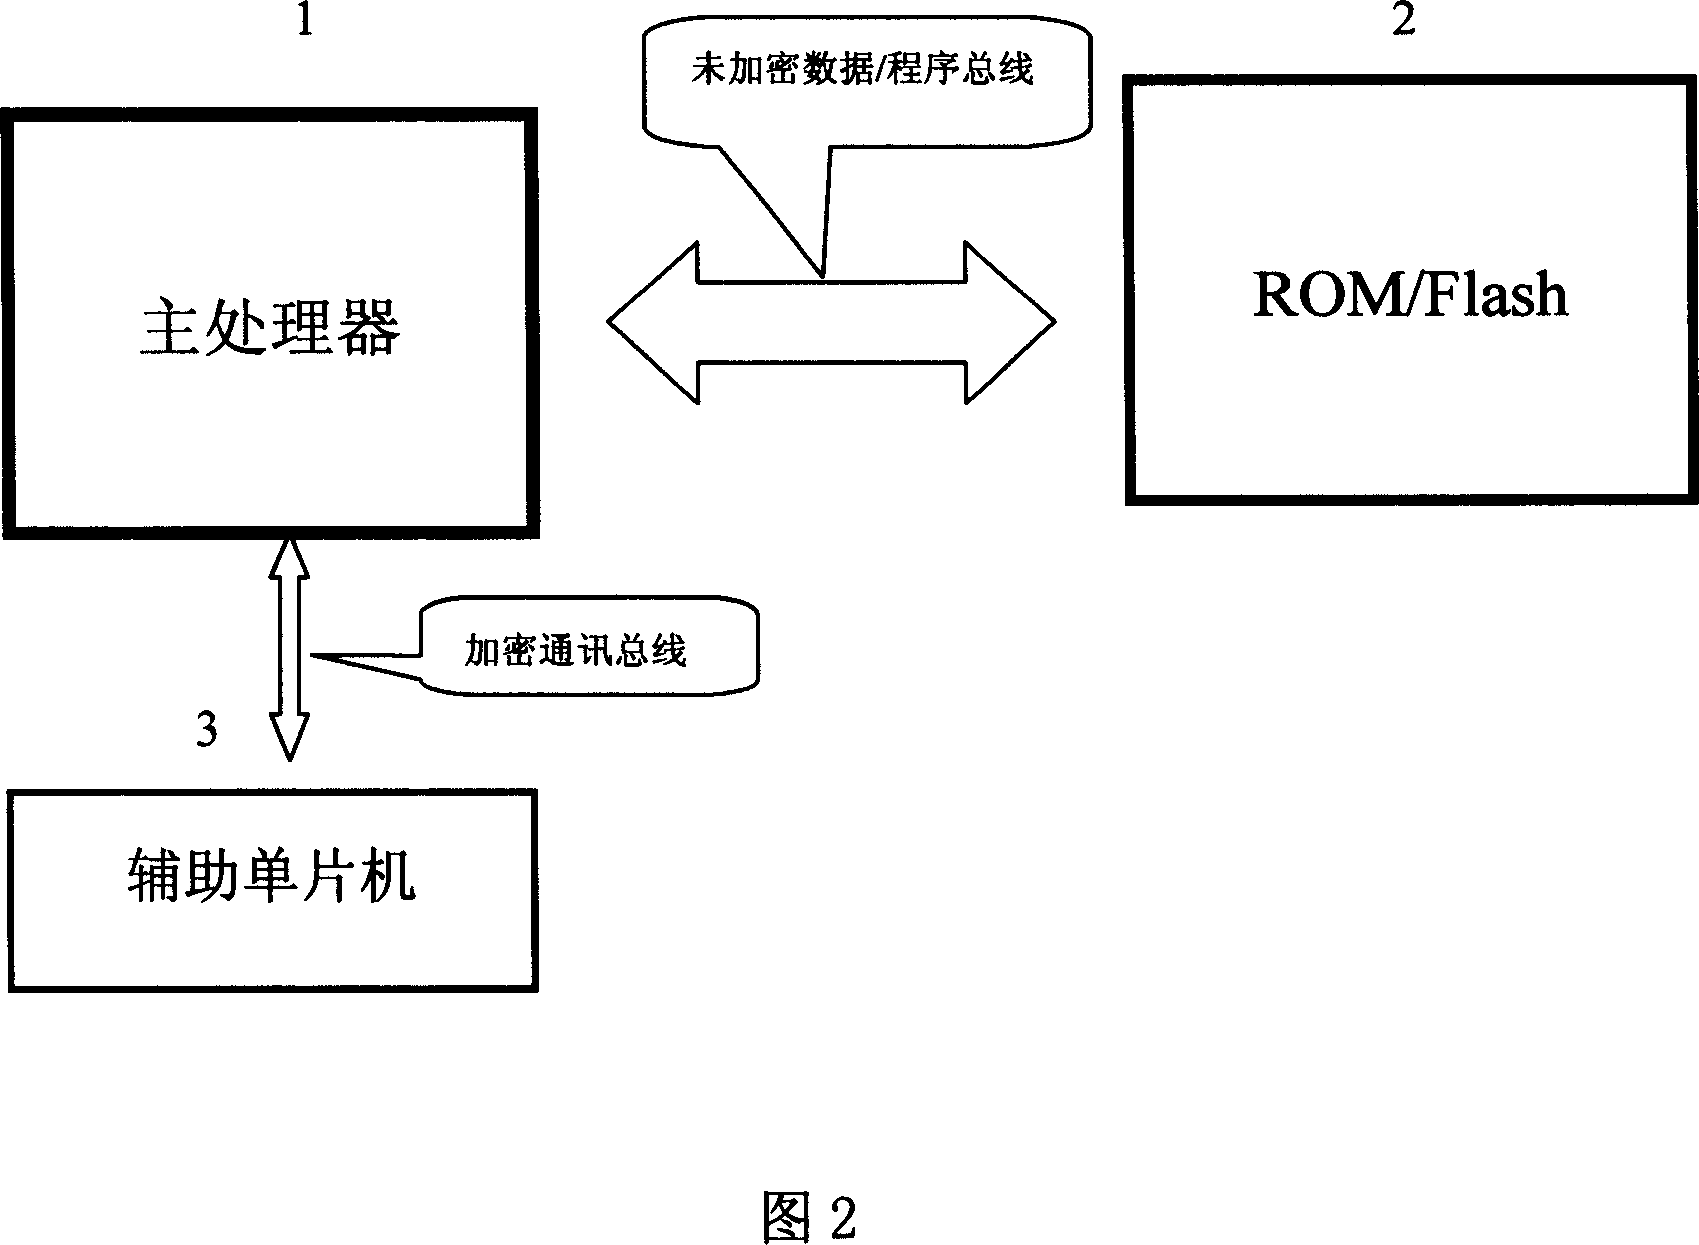 System encrypted method using multifunctional assistant SCM